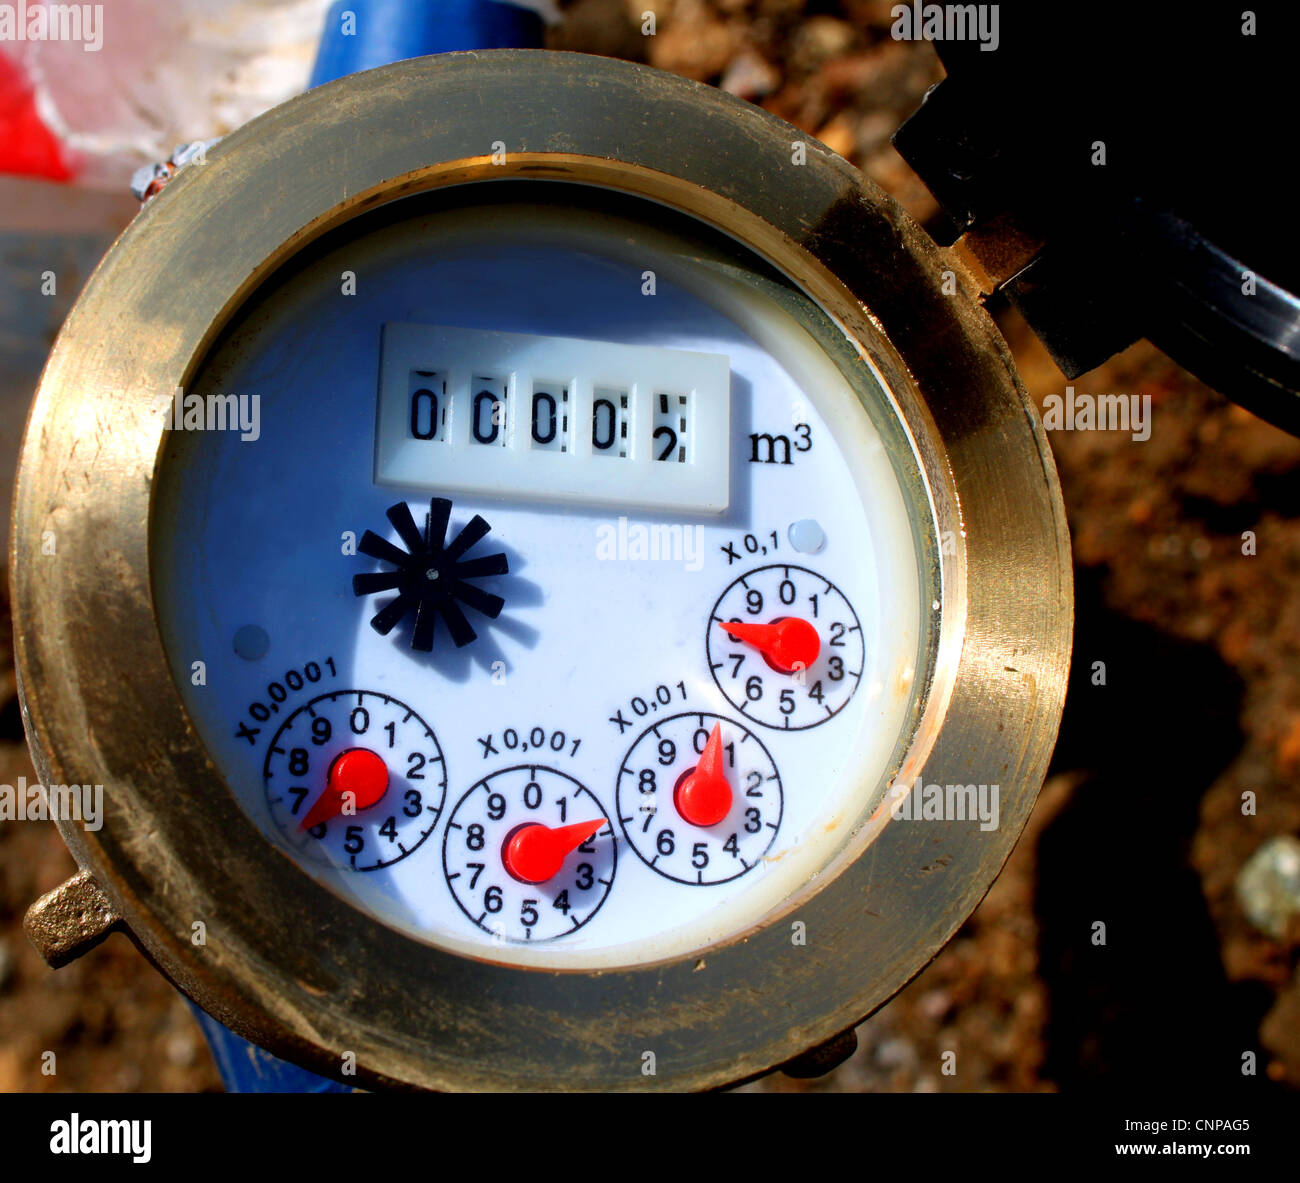 Close up image of a newly installed brass water meter in a suburban village. Stock Photo